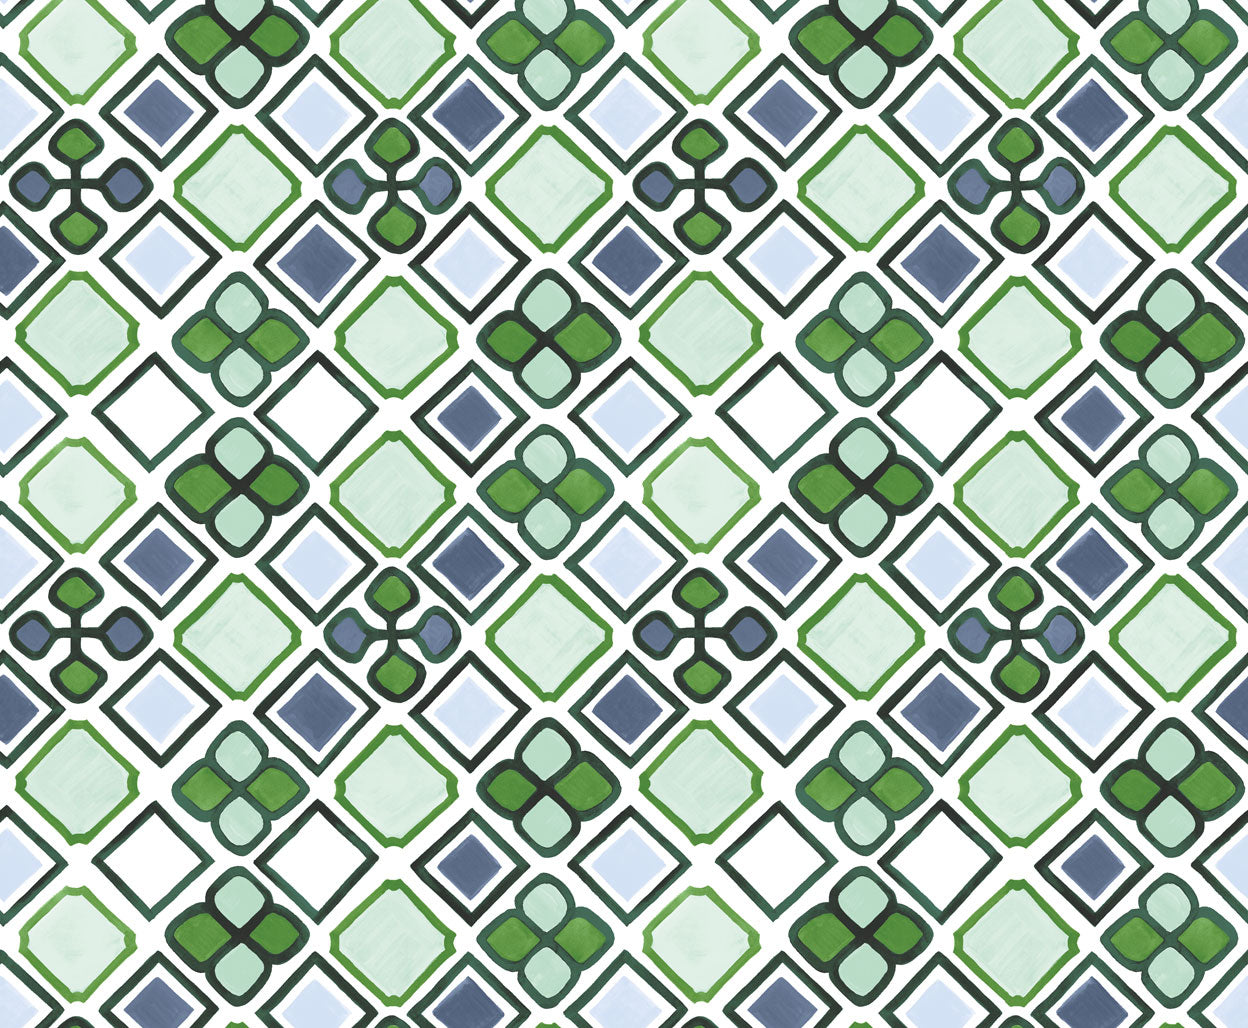 Detail of wallpaper in a geometric diamond and floral print in shades of green, purple and white.